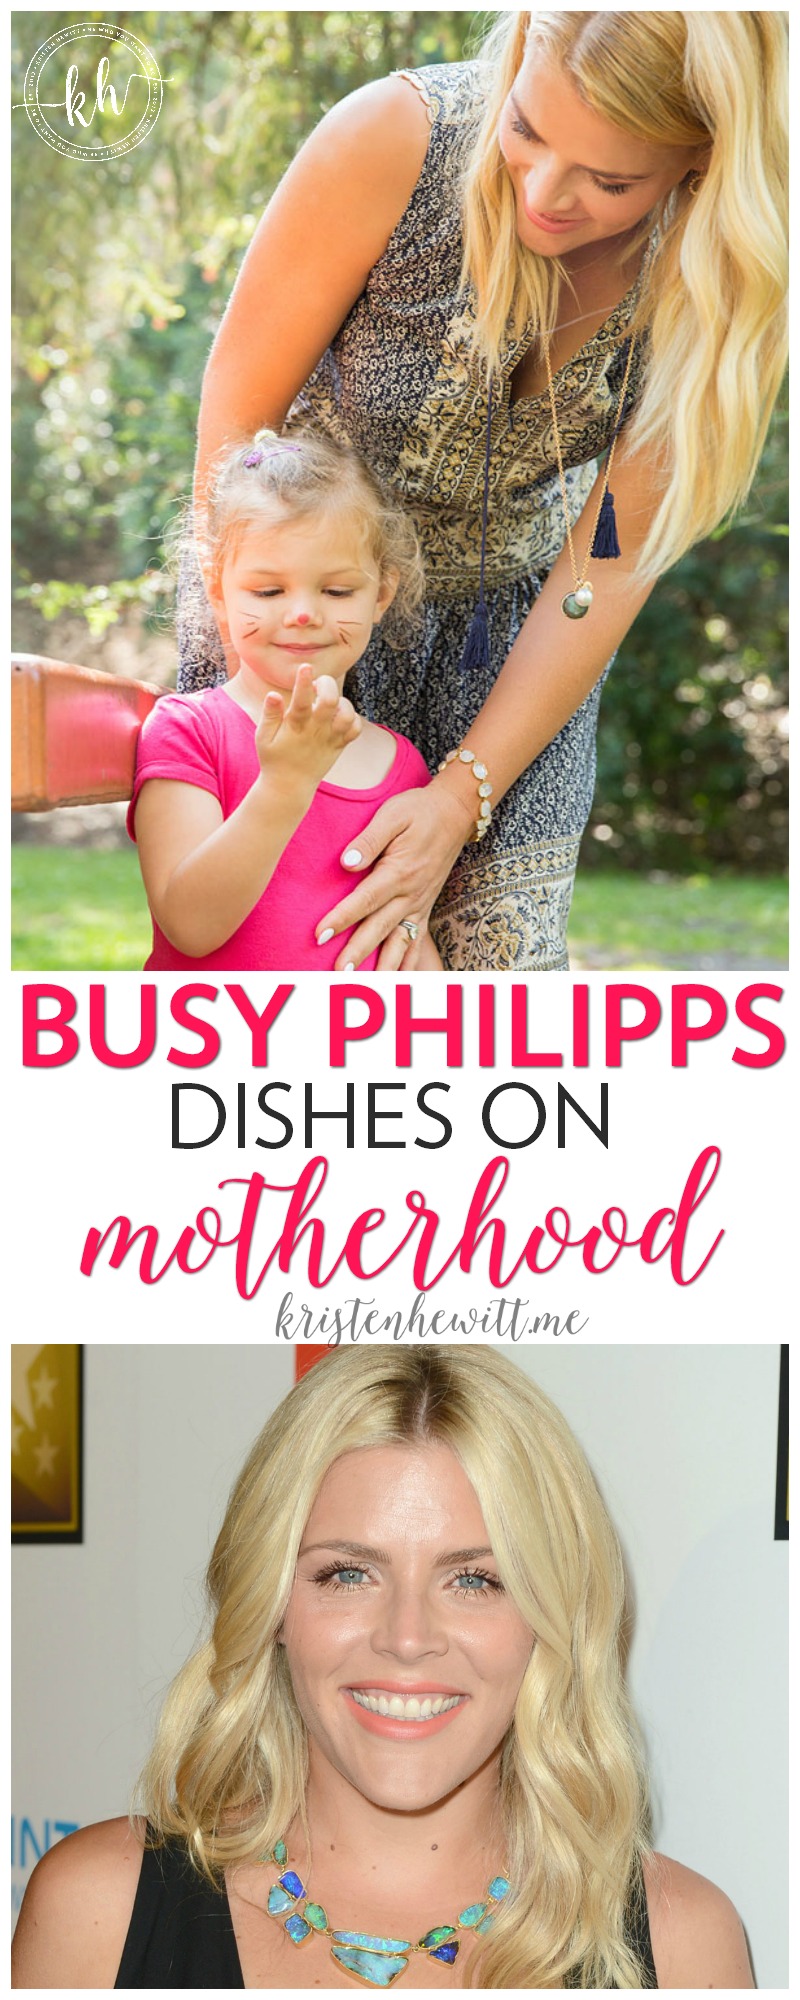 She's a movie star and a social media icon, but she's also a mom. Check out this interview with Busy Philips and learn more about real motherhood!